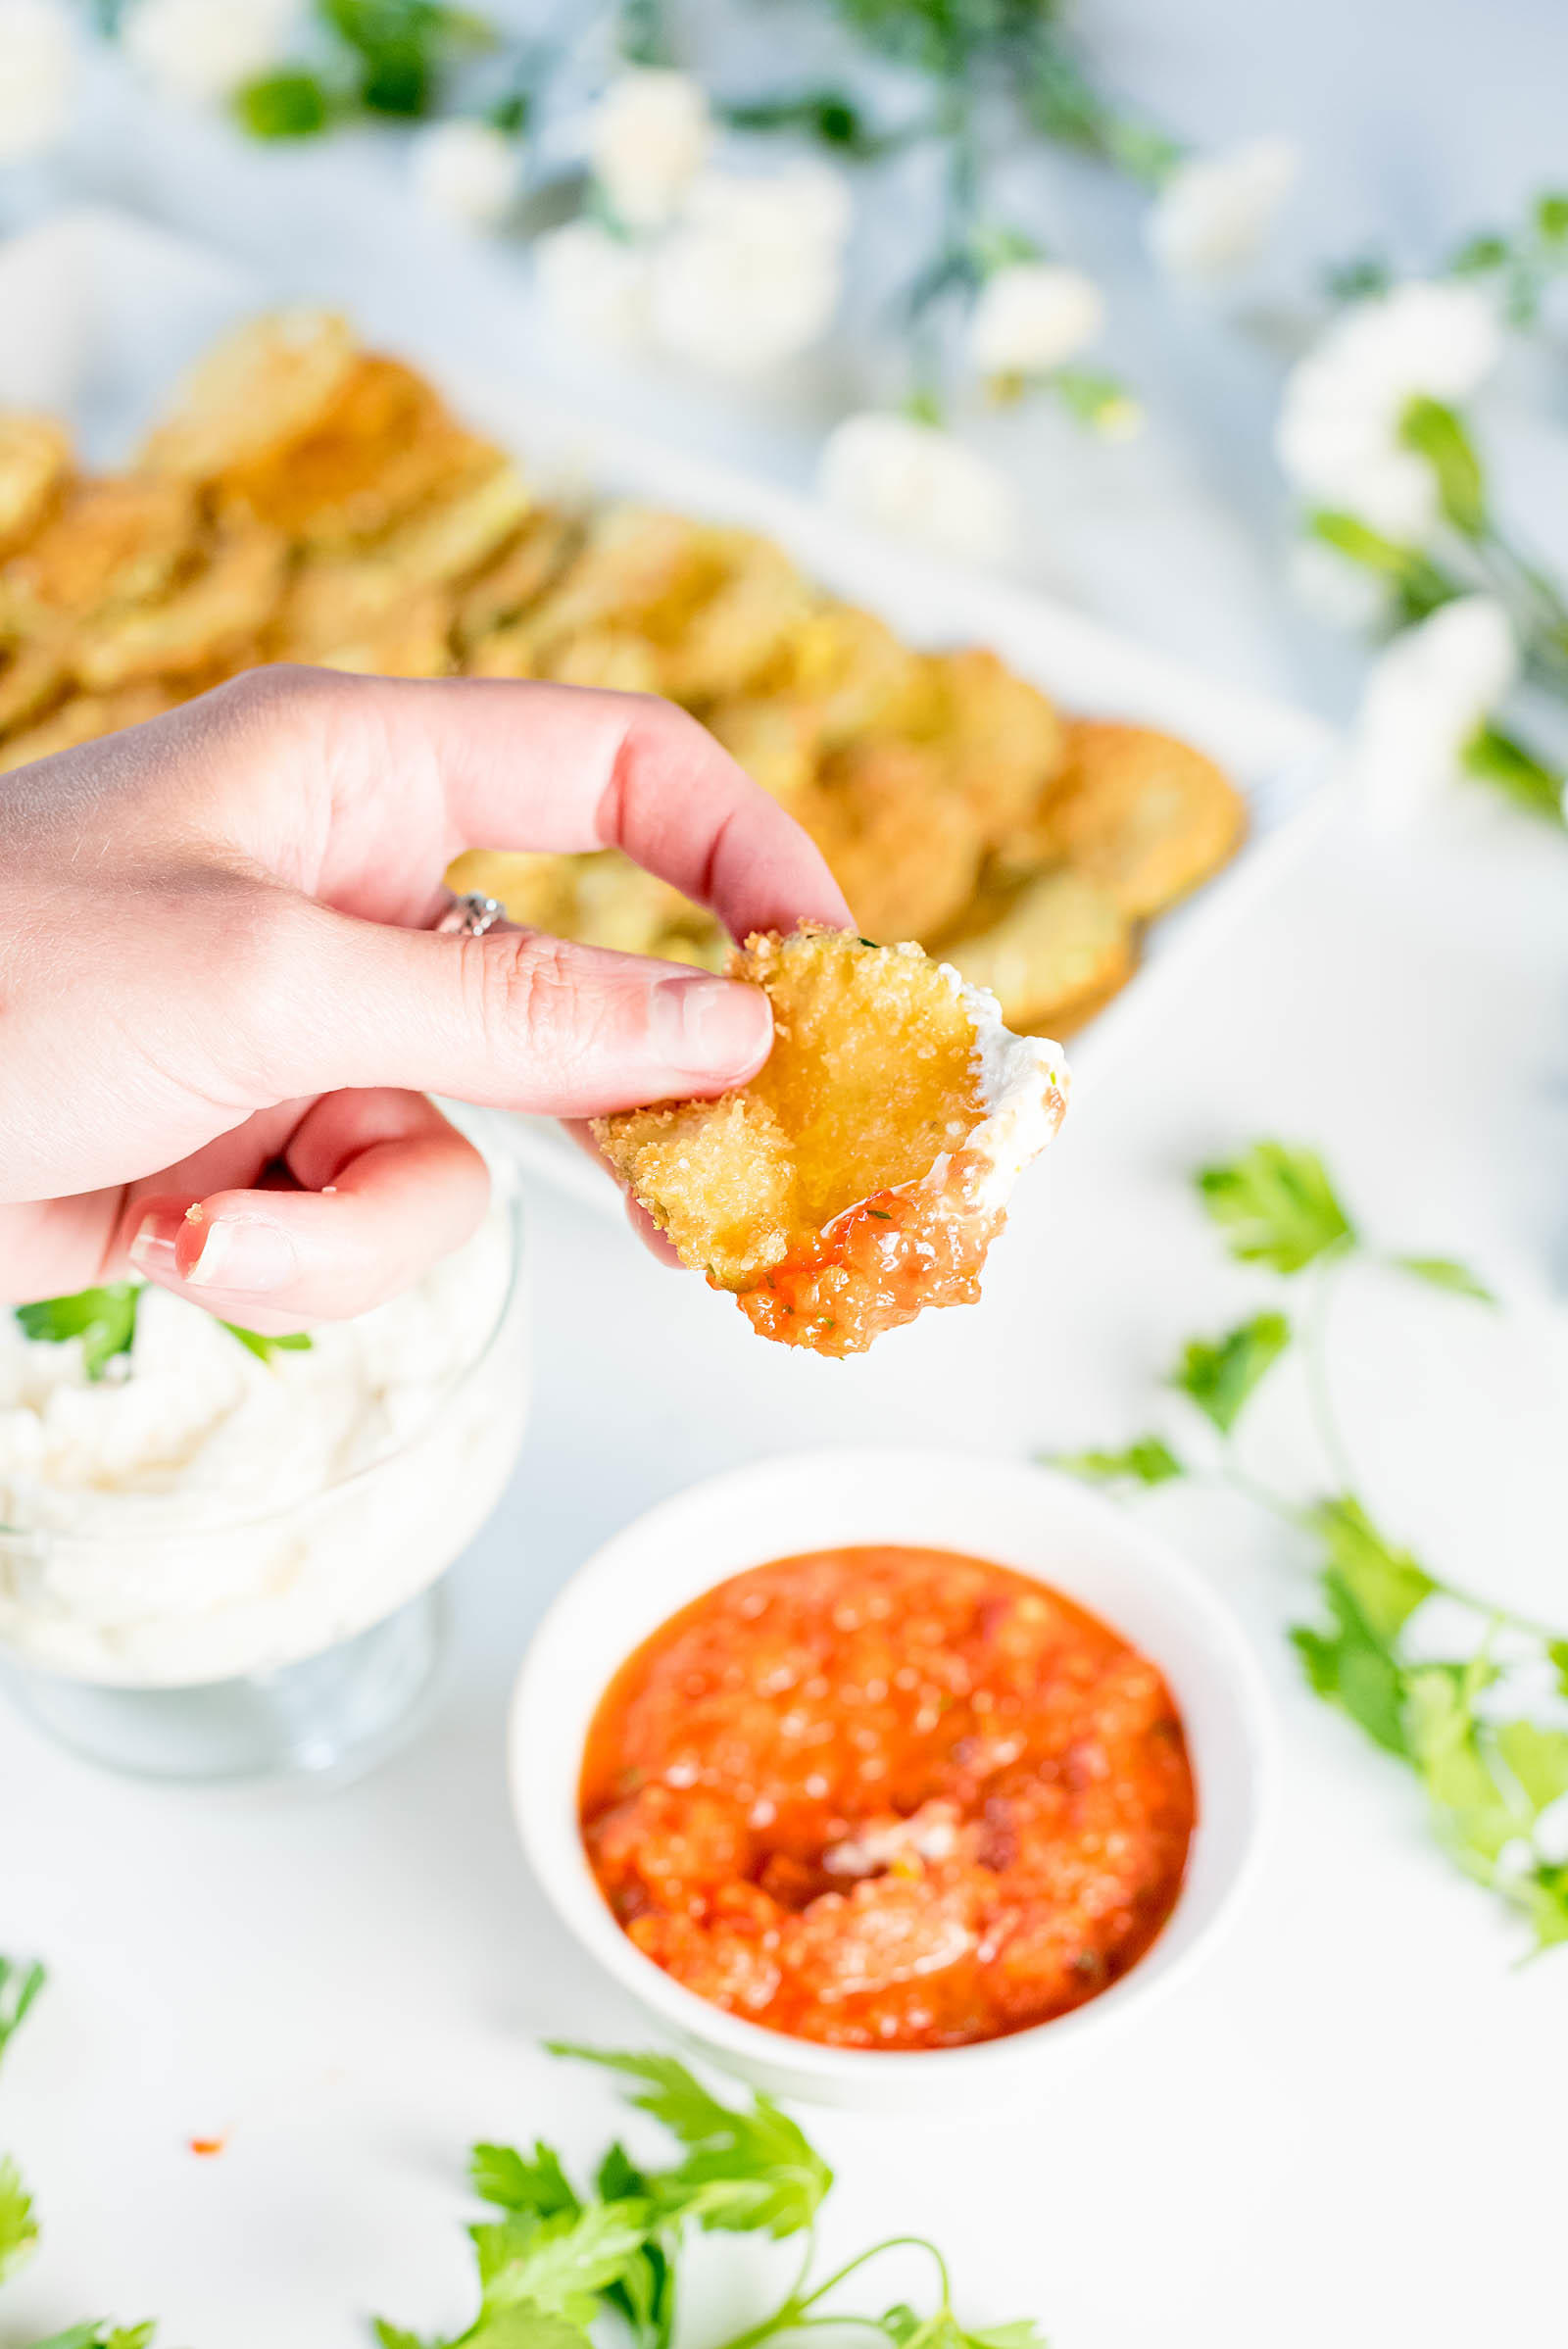 Fried Zucchini Chip Recipe Roasted Red Pepper Relish